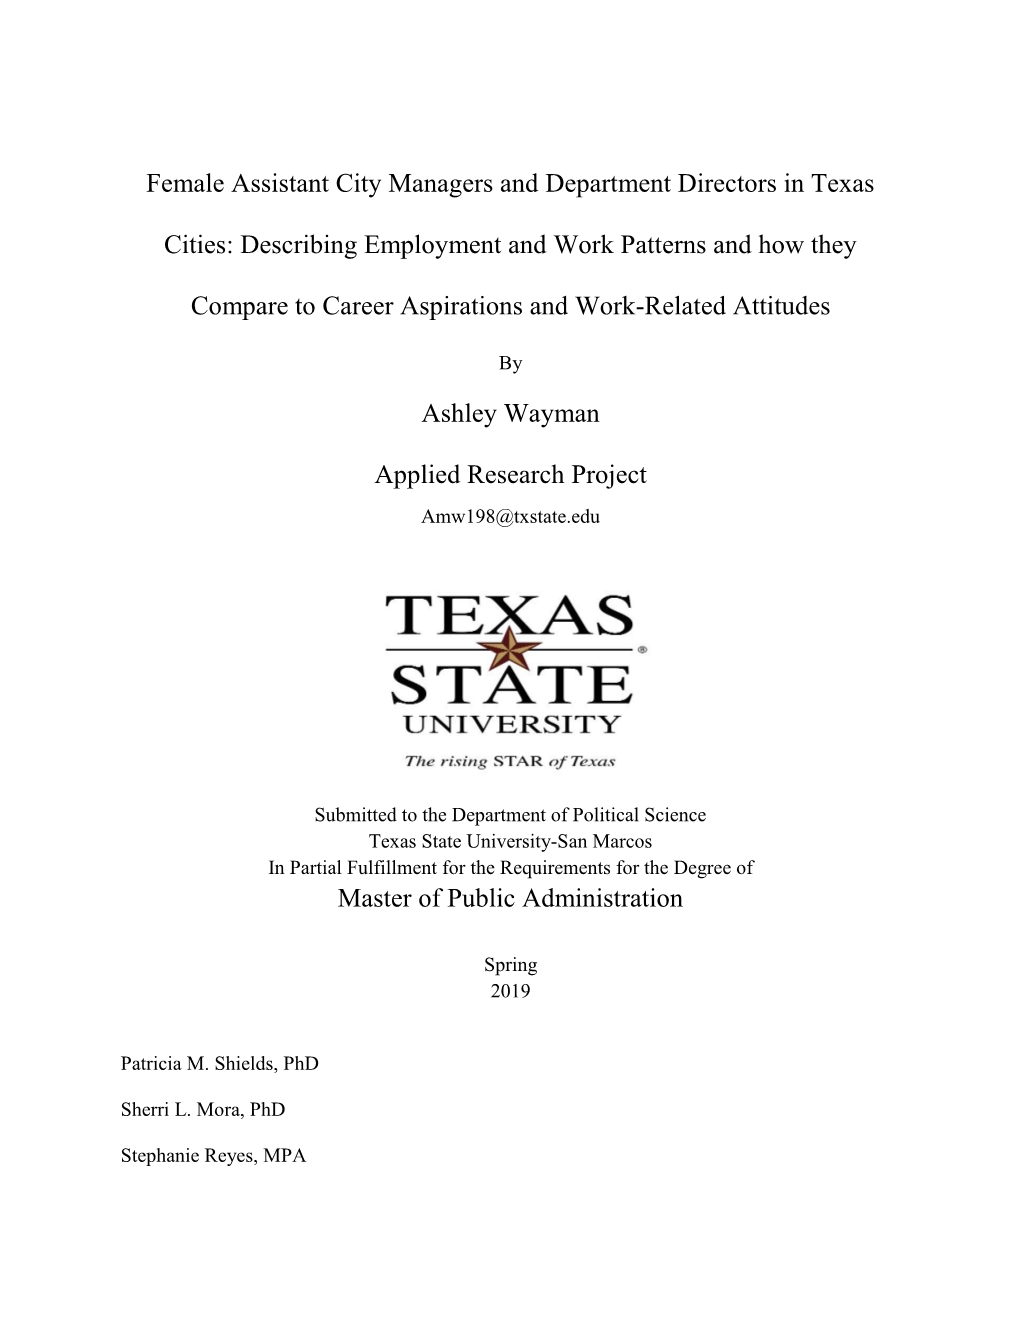 Female Assistant City Managers and Department Directors in Texas Cities